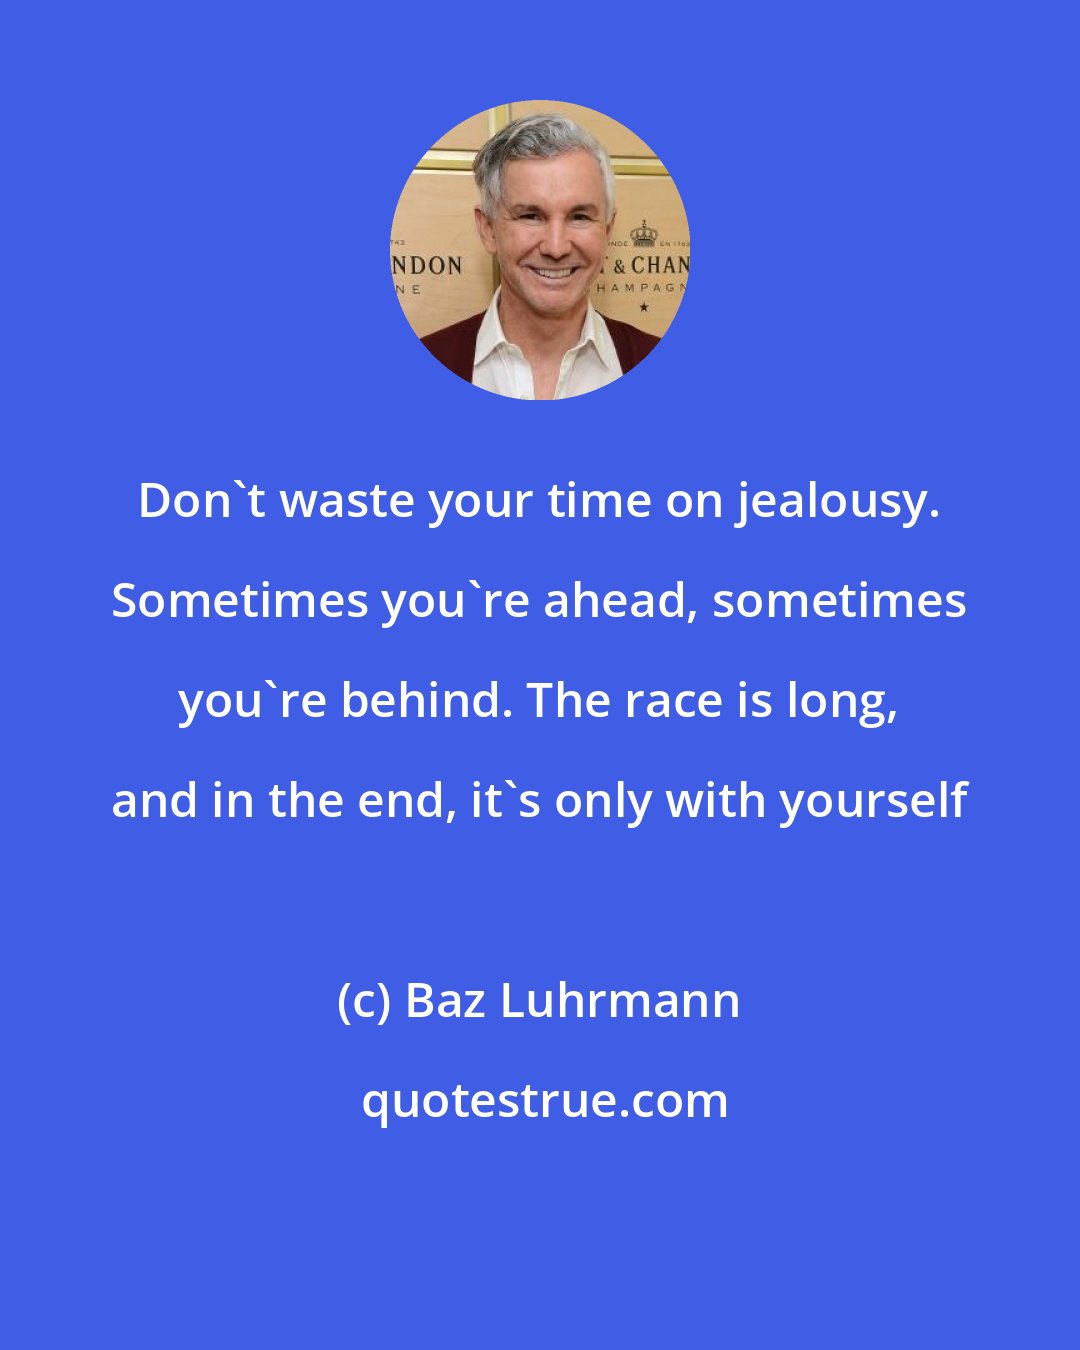 Baz Luhrmann: Don't waste your time on jealousy. Sometimes you're ahead, sometimes you're behind. The race is long, and in the end, it's only with yourself